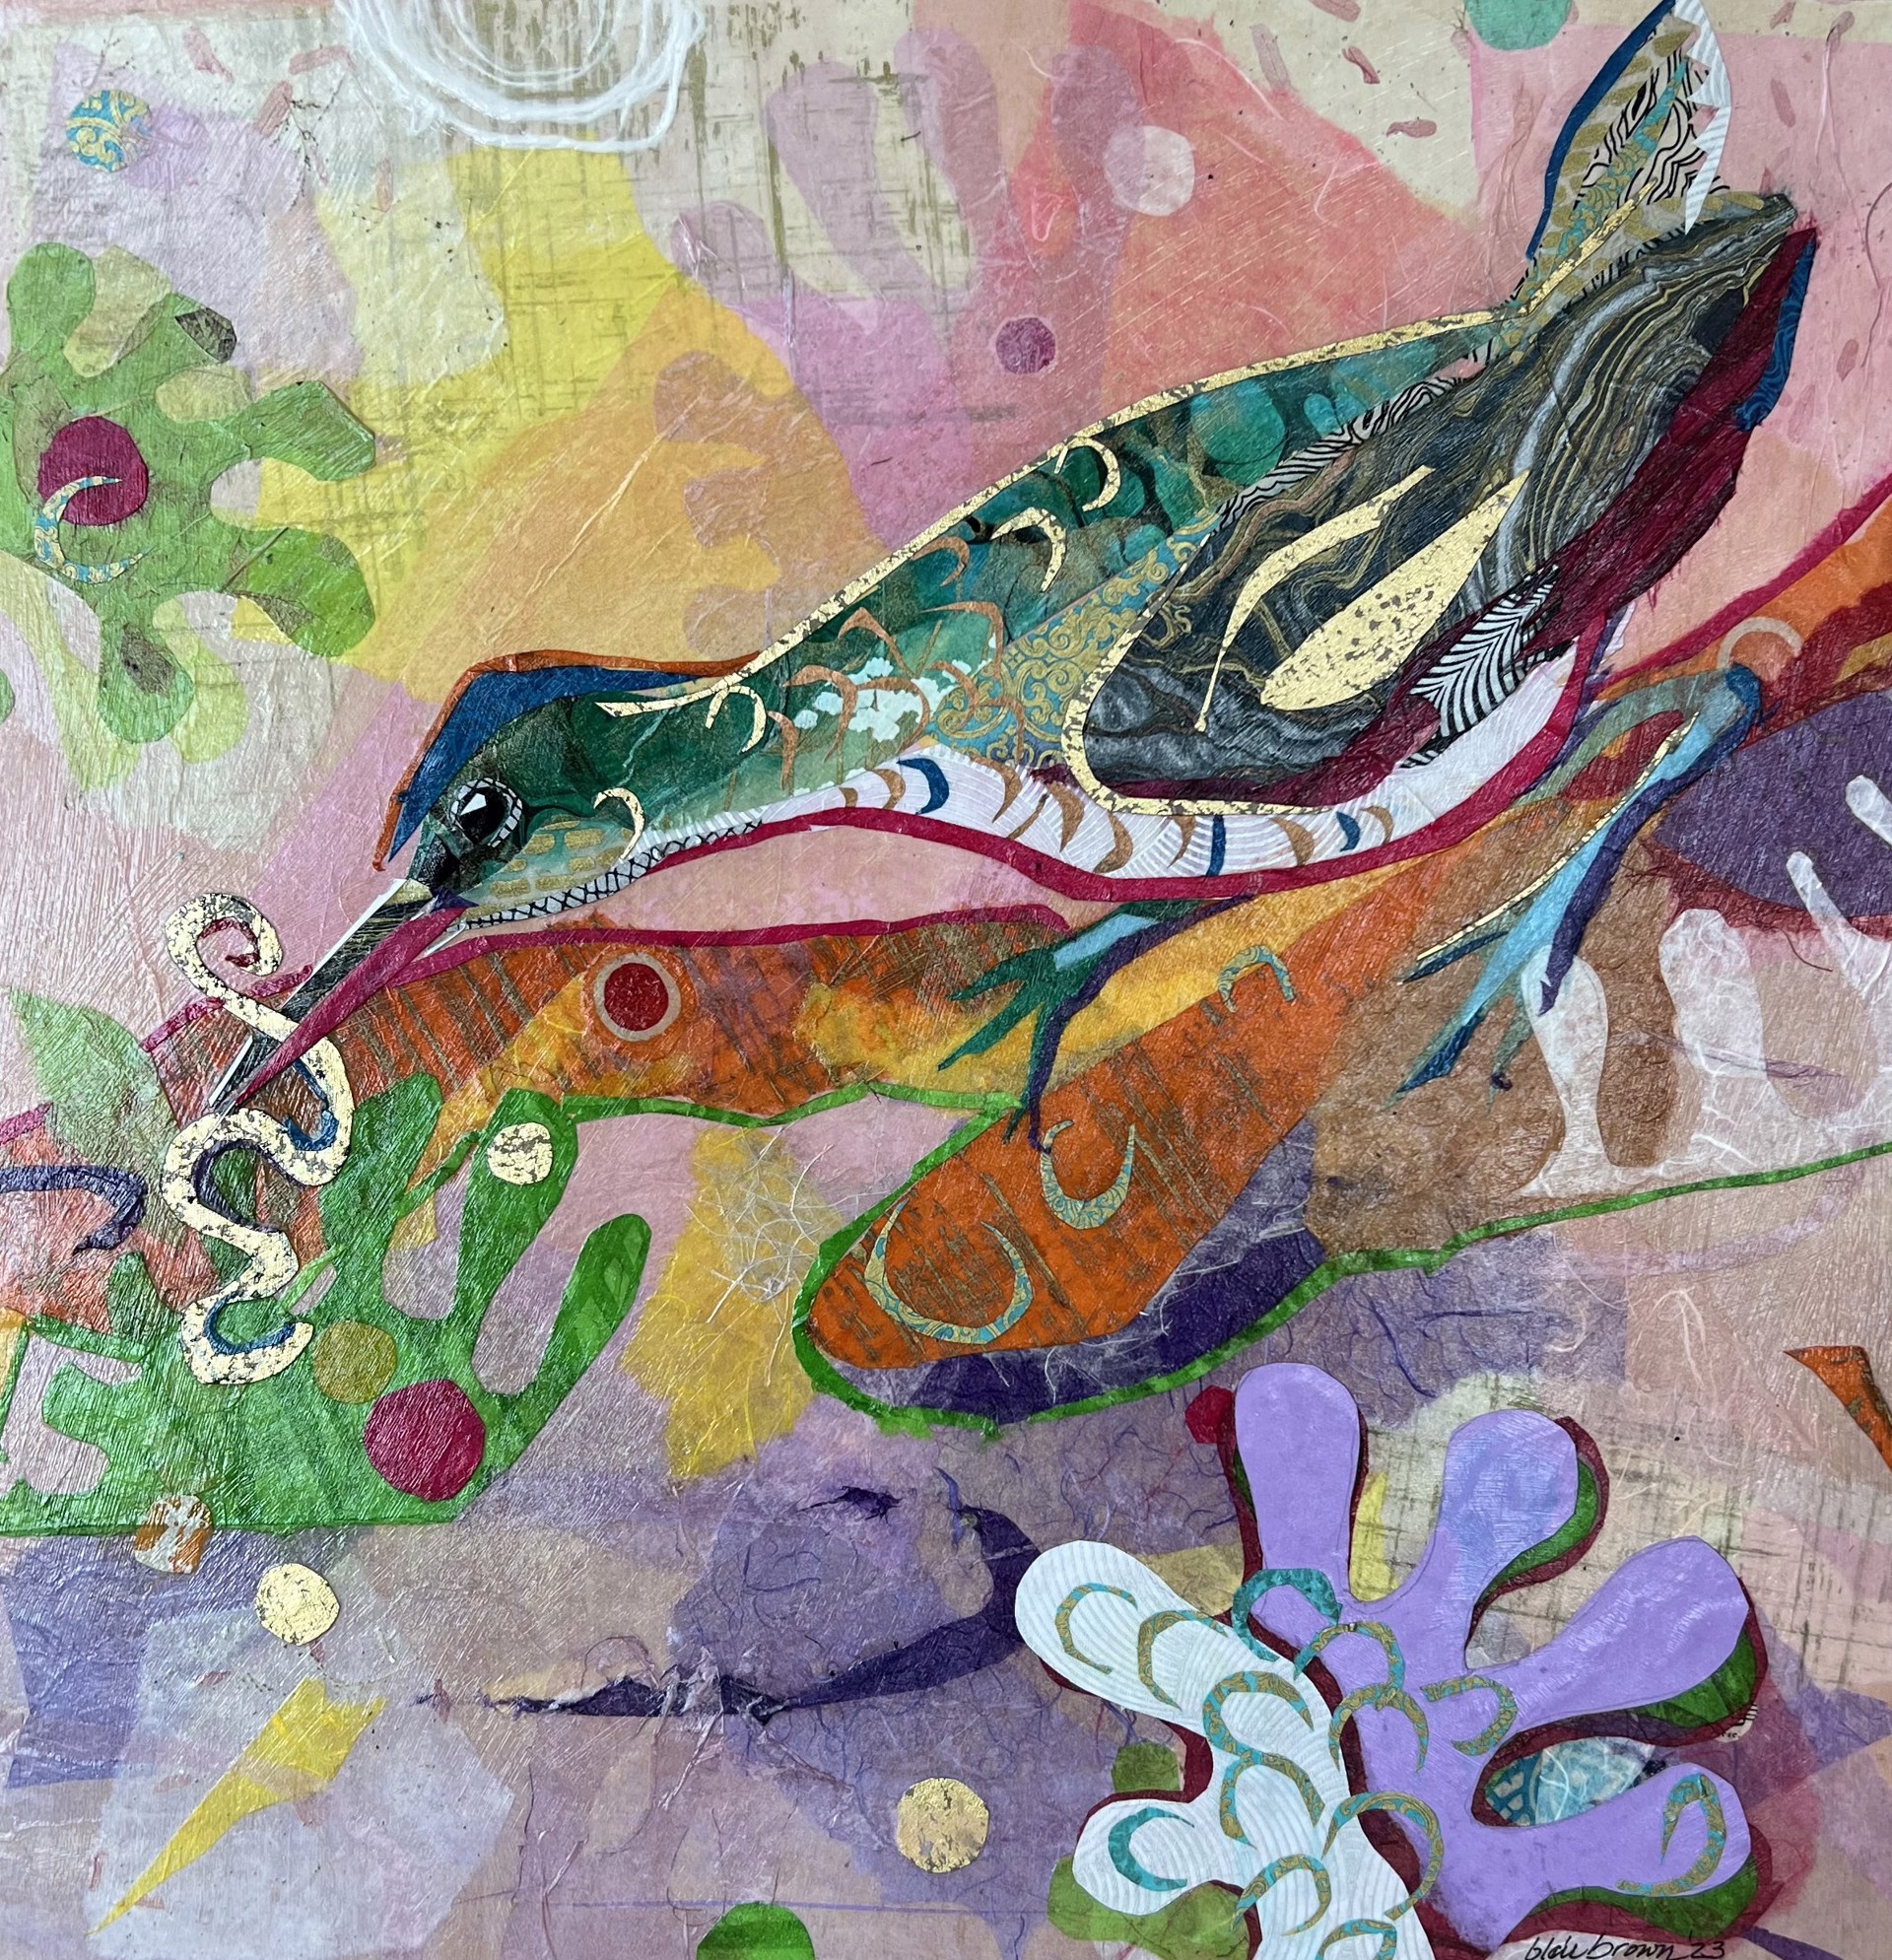 Willet and Wormhole by Blair Brown